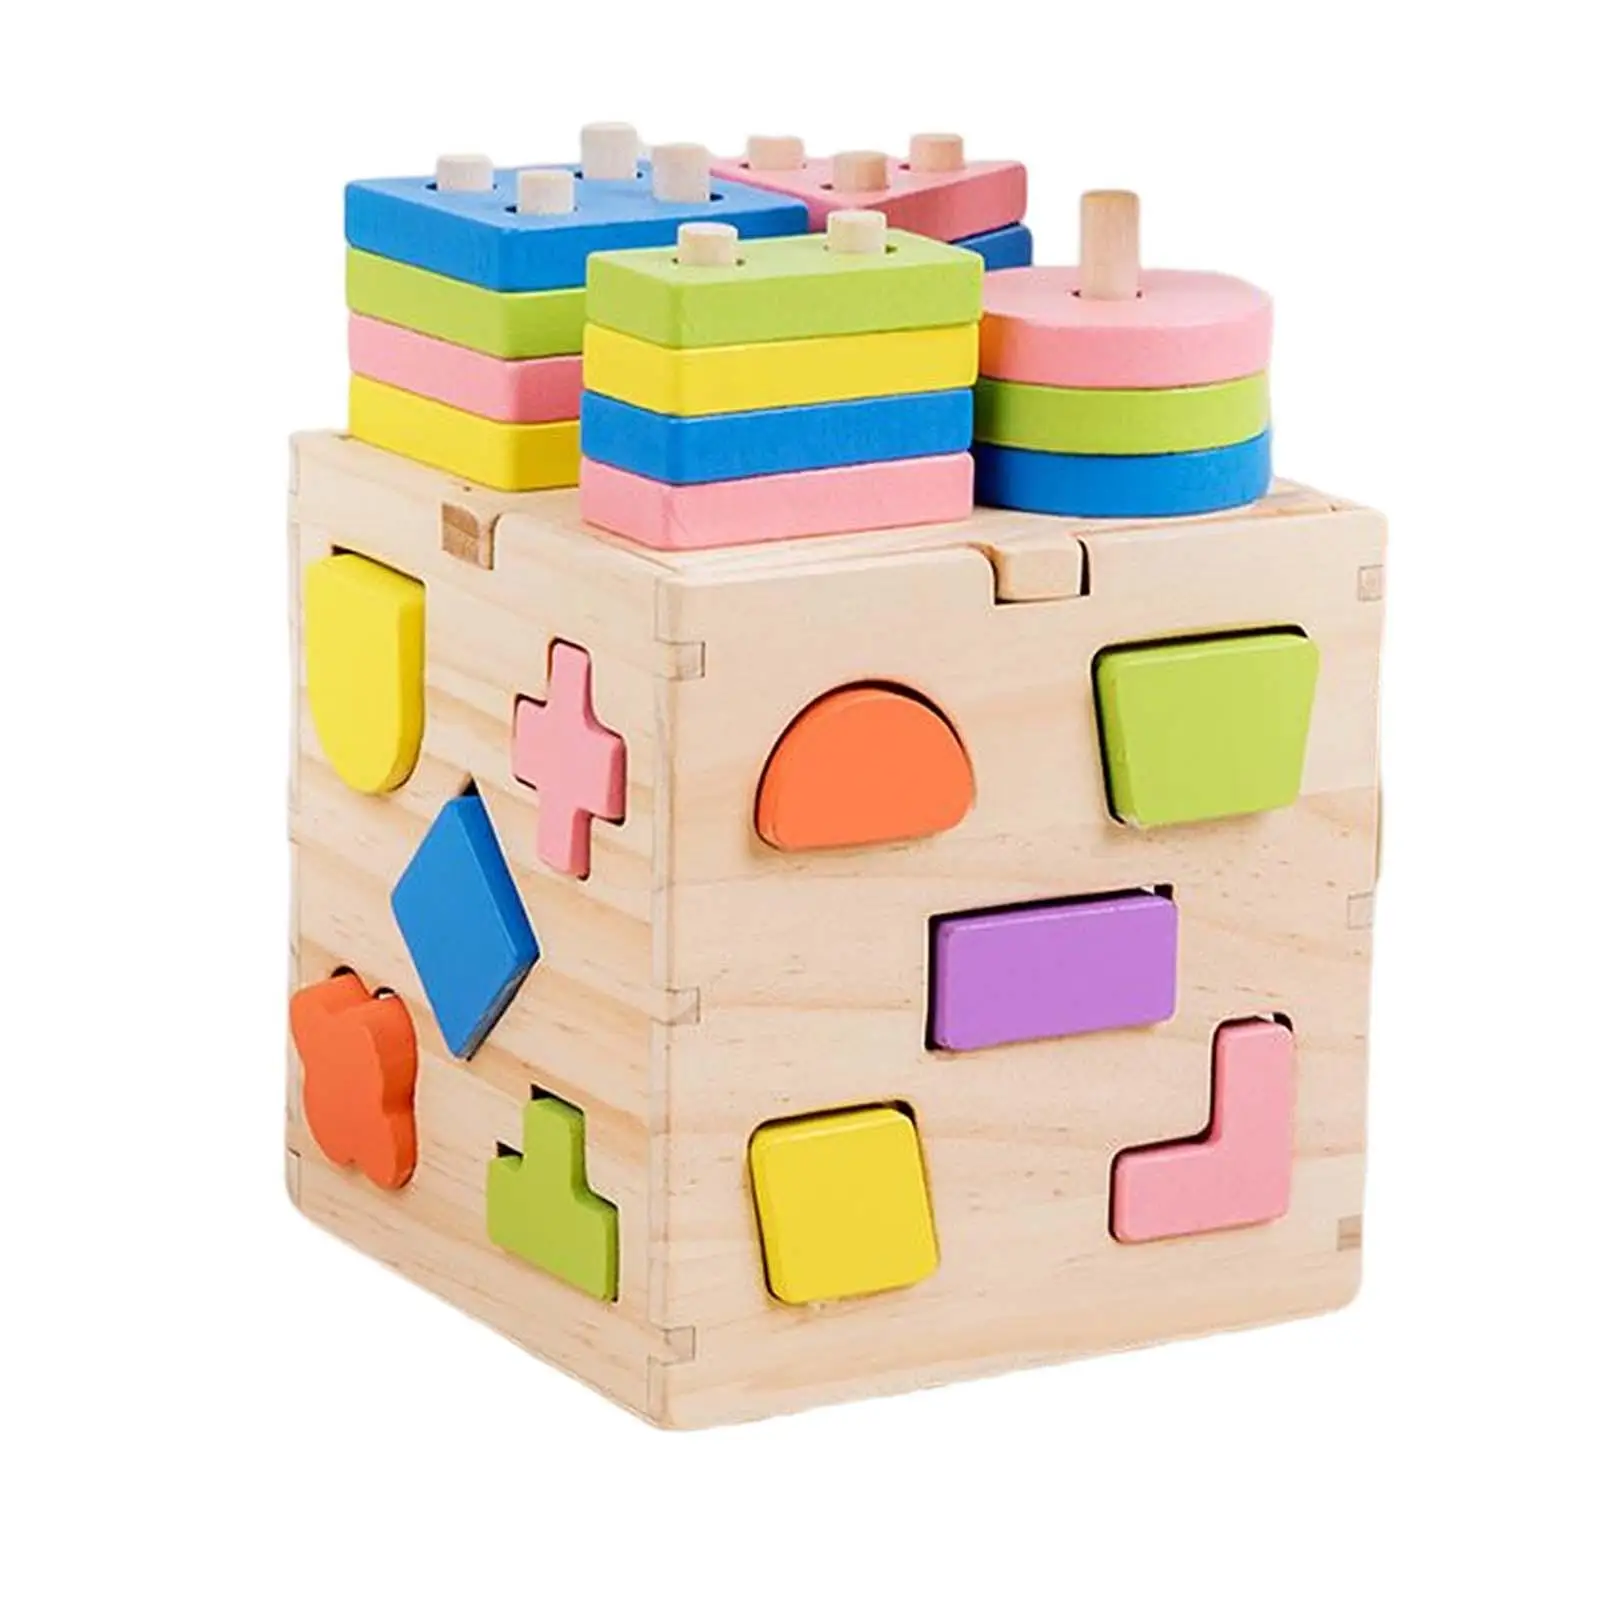 Wooden Block Toys Early Educational Learning Toy for Kids Holiday Gifts